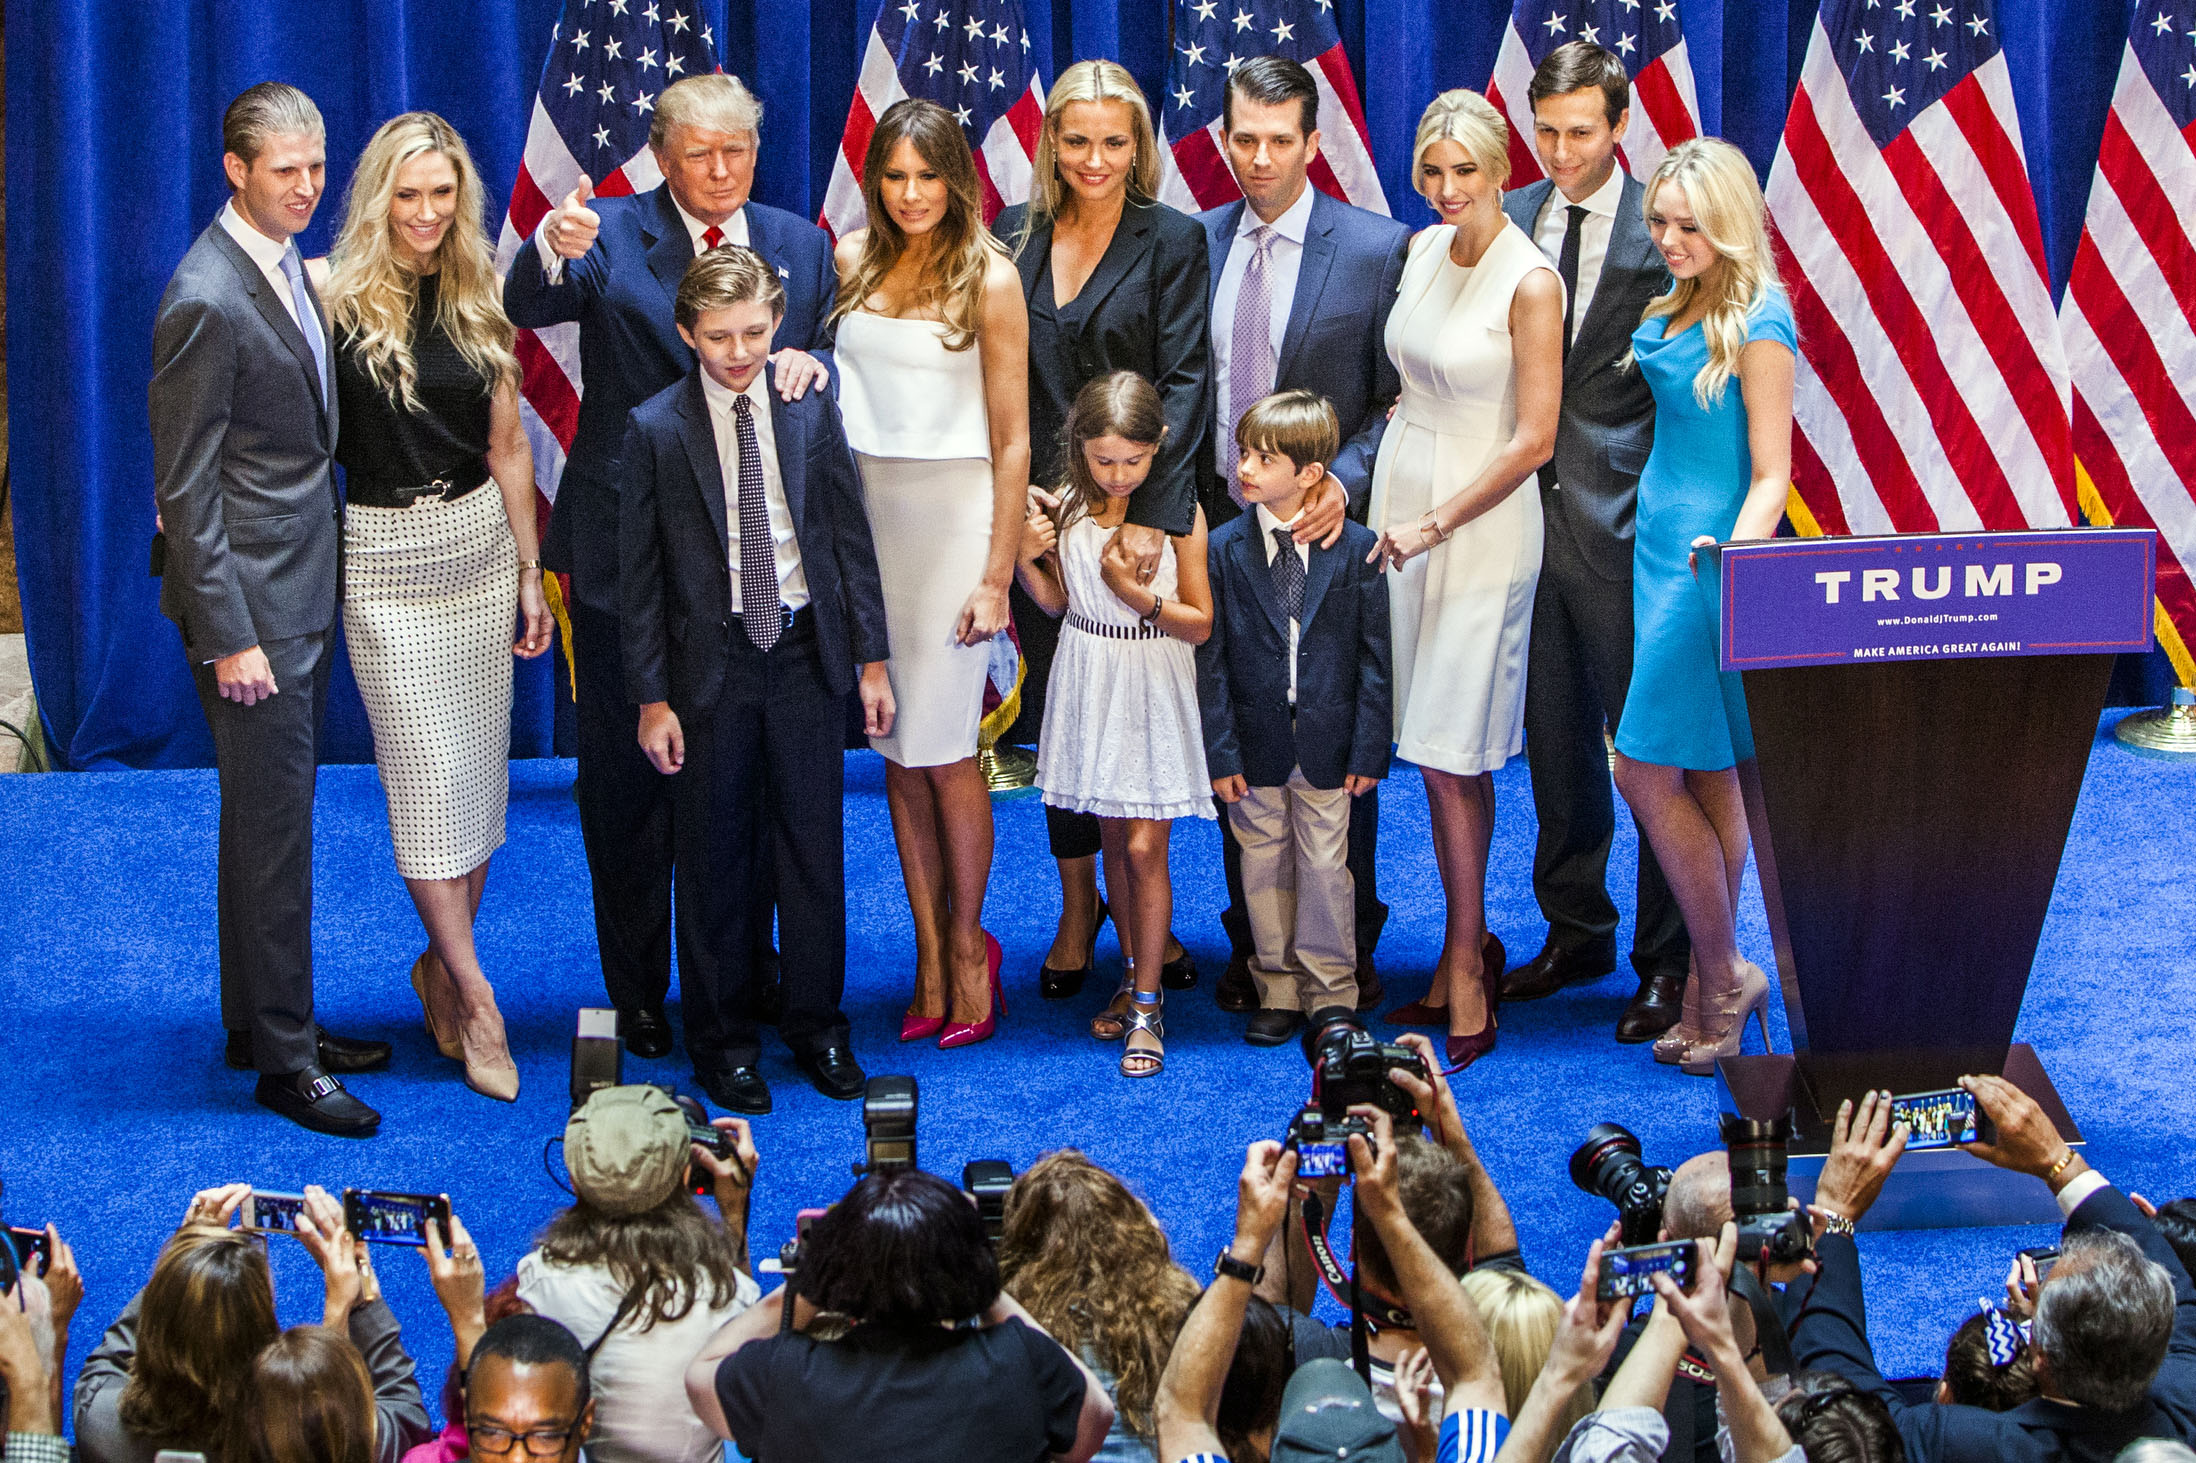 From left, Eric Trump, Lara Yunaska Trump, Donald Trump, Barron Trump, Melania Trump, Vanessa Haydon Trump, Kai Madison Trump, Donald Trump Jr., Donald John Trump III, Ivanka Trump, Jared Kushner and Tiffany Trump appear on stage after Donald Trump announced his candidacy for presidency at Trump Tower on June 16, 2015 in New York. (Christopher Gregory—Getty Images)